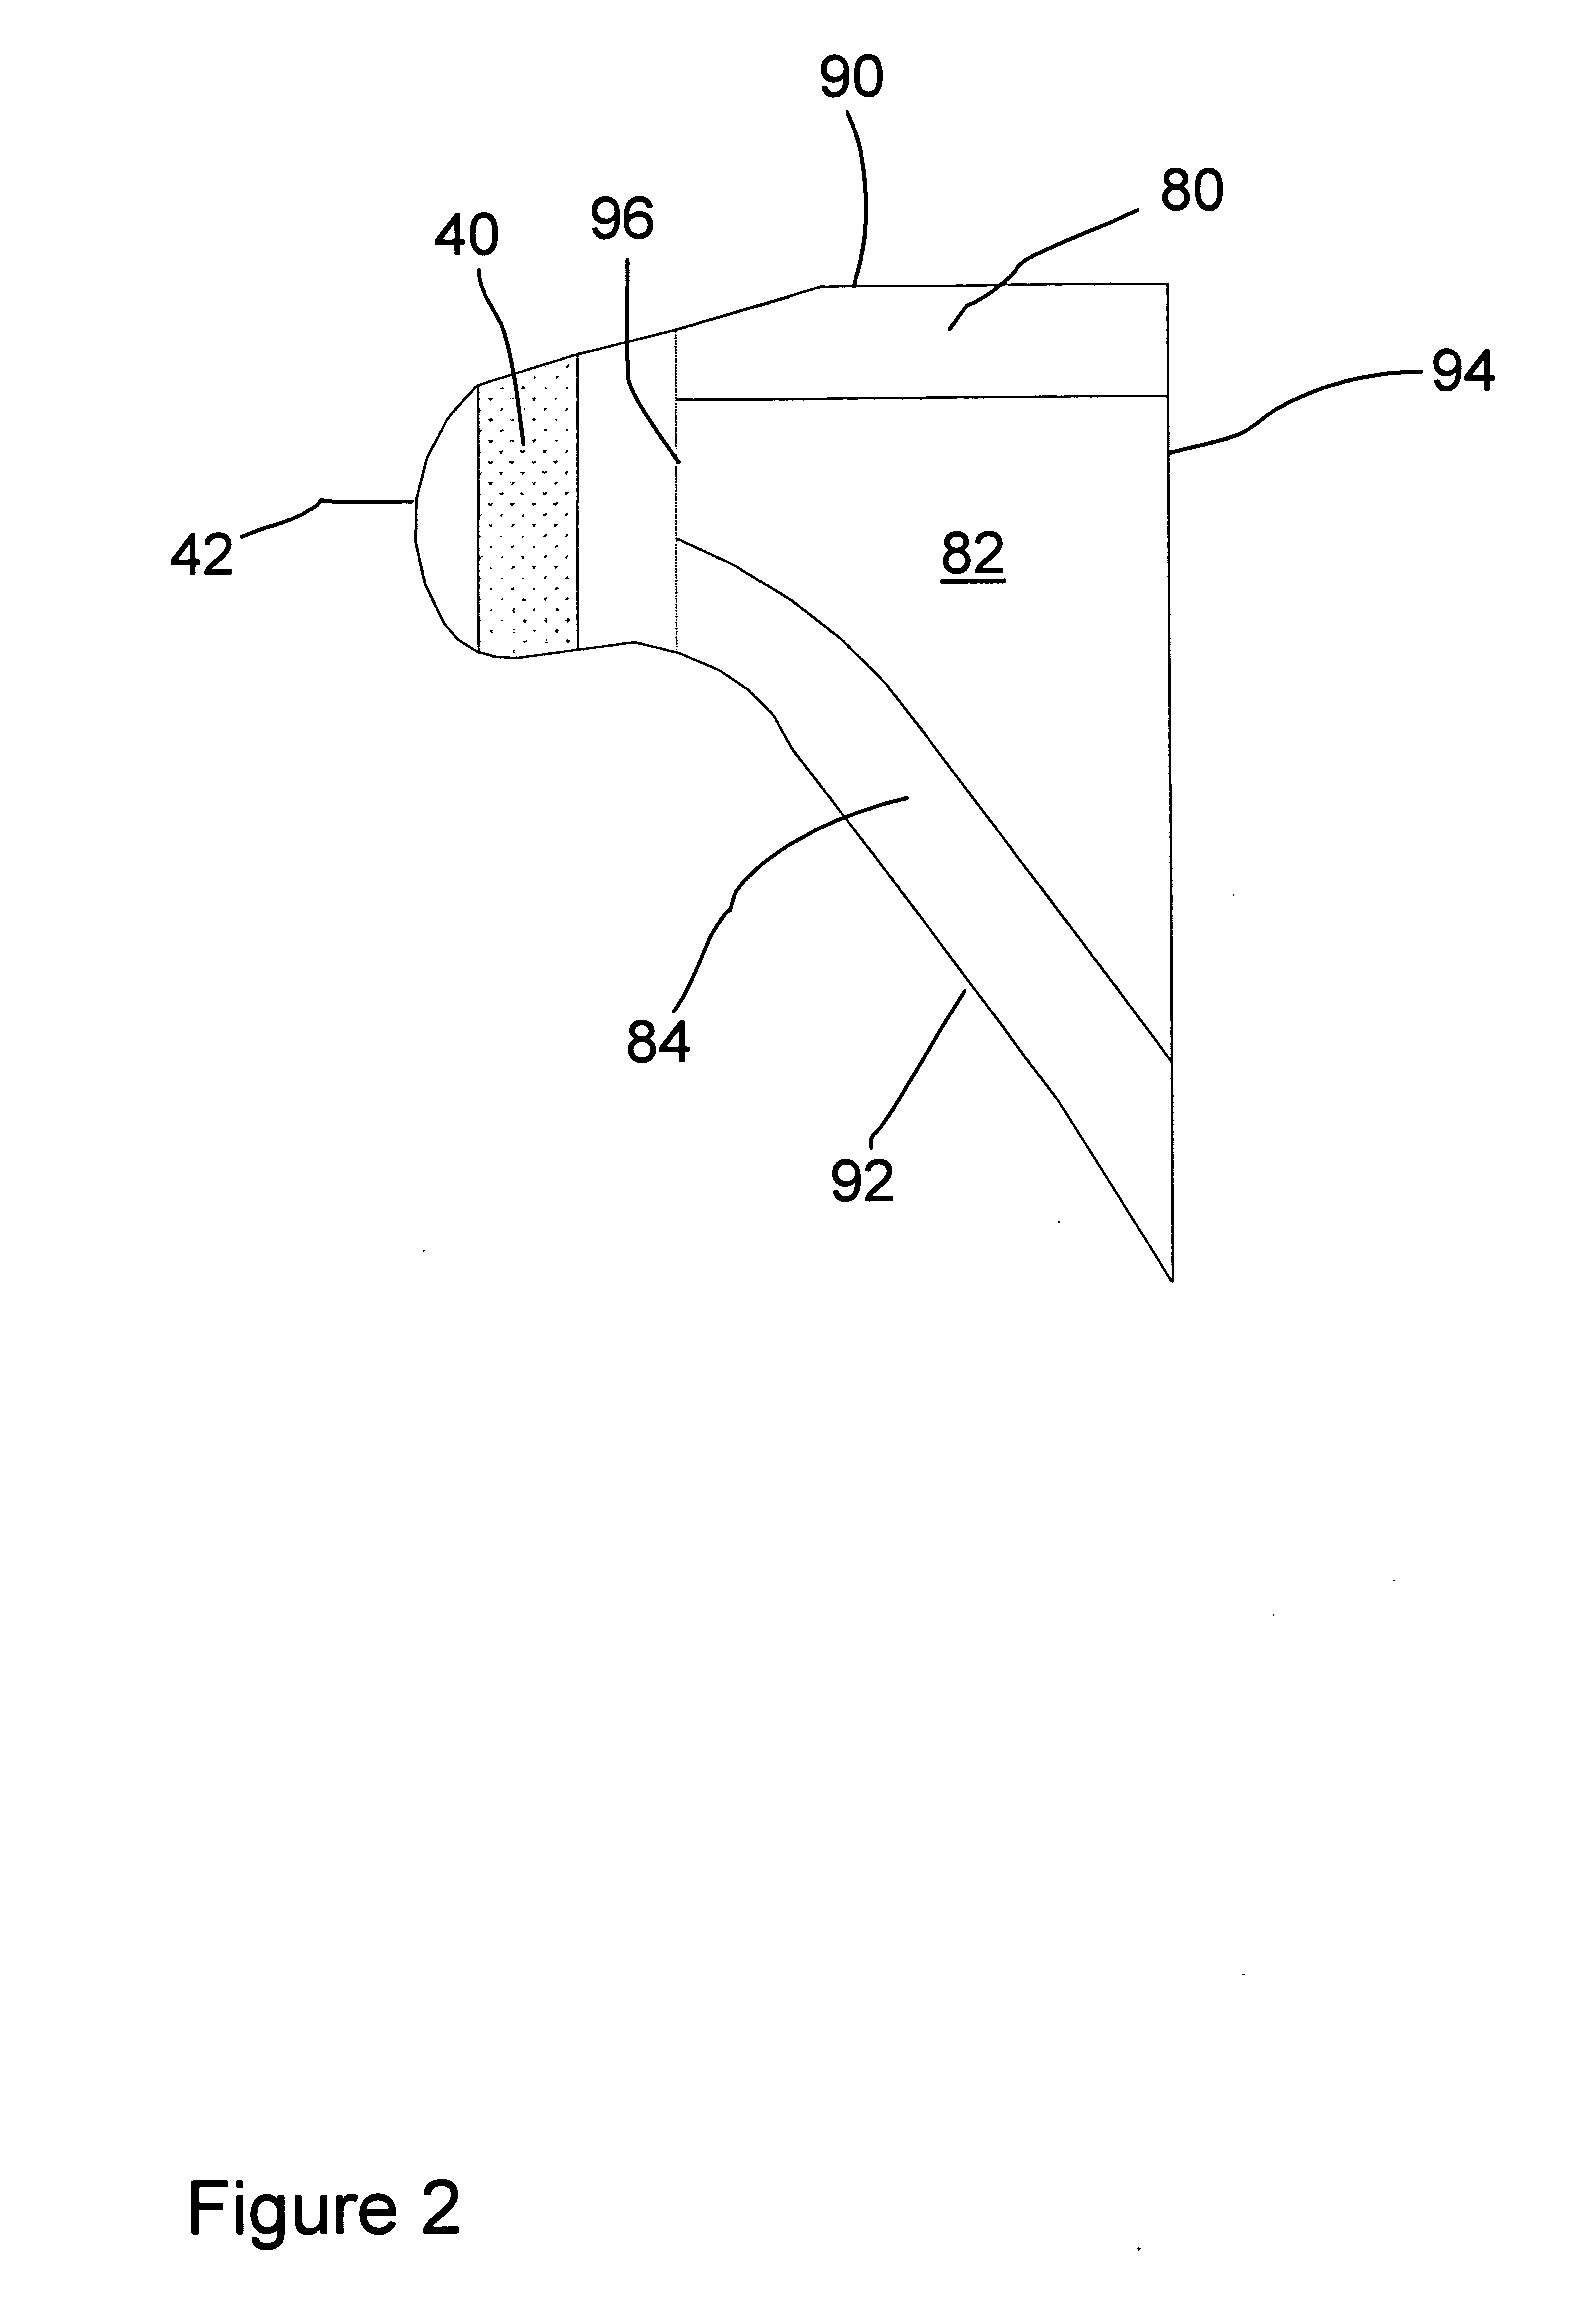 Disposable absorbent article having side panels with structurally, functionally and visually different regions